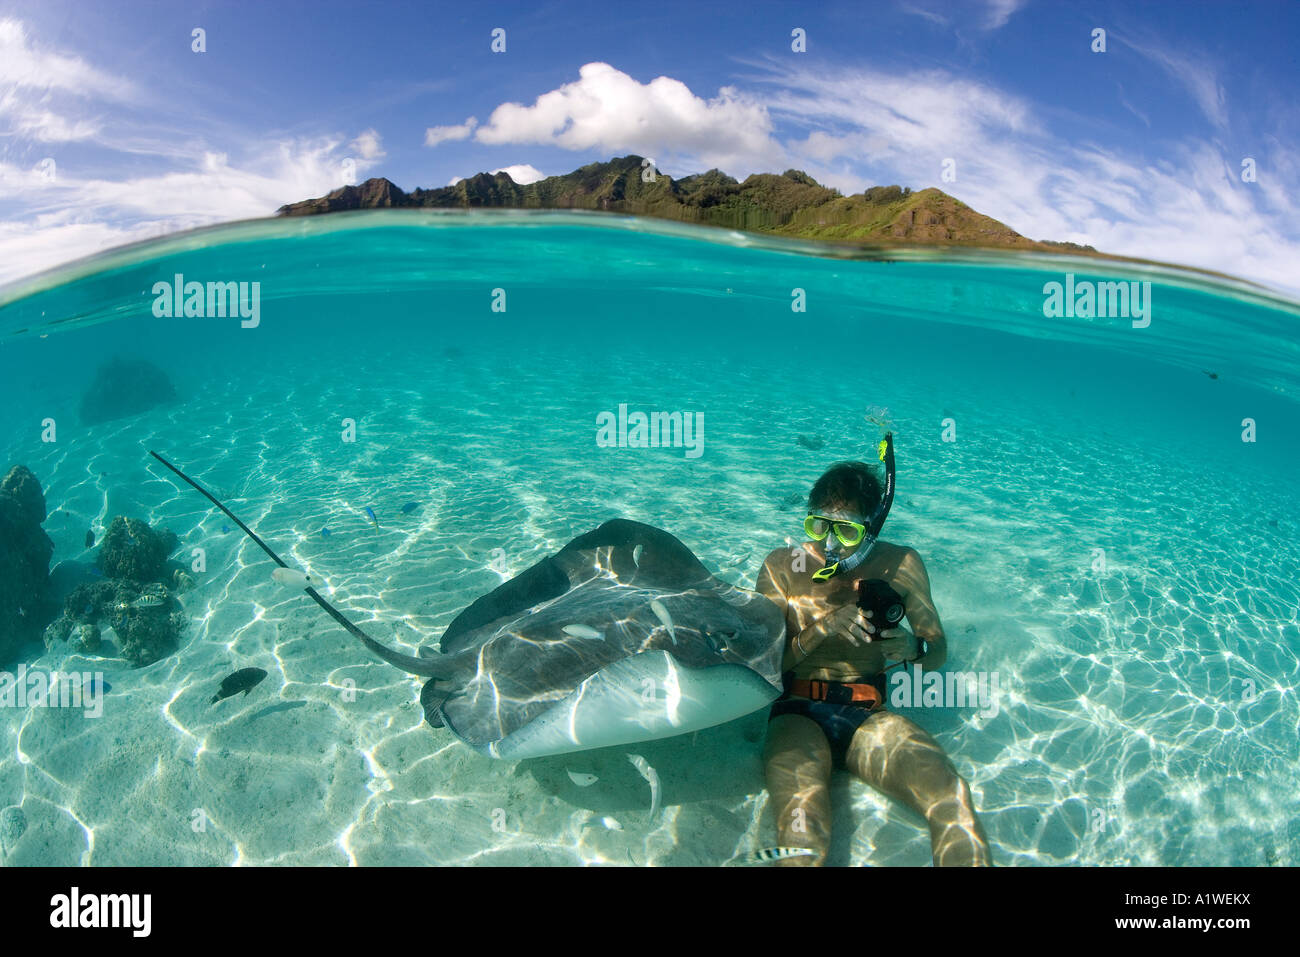 A MALE SNORKELER IS APPROACHED BY A INQUISITIVE TAHITIAN STINGRAY HIMANTURA FAI FRENCH POLYNESIA Stock Photo